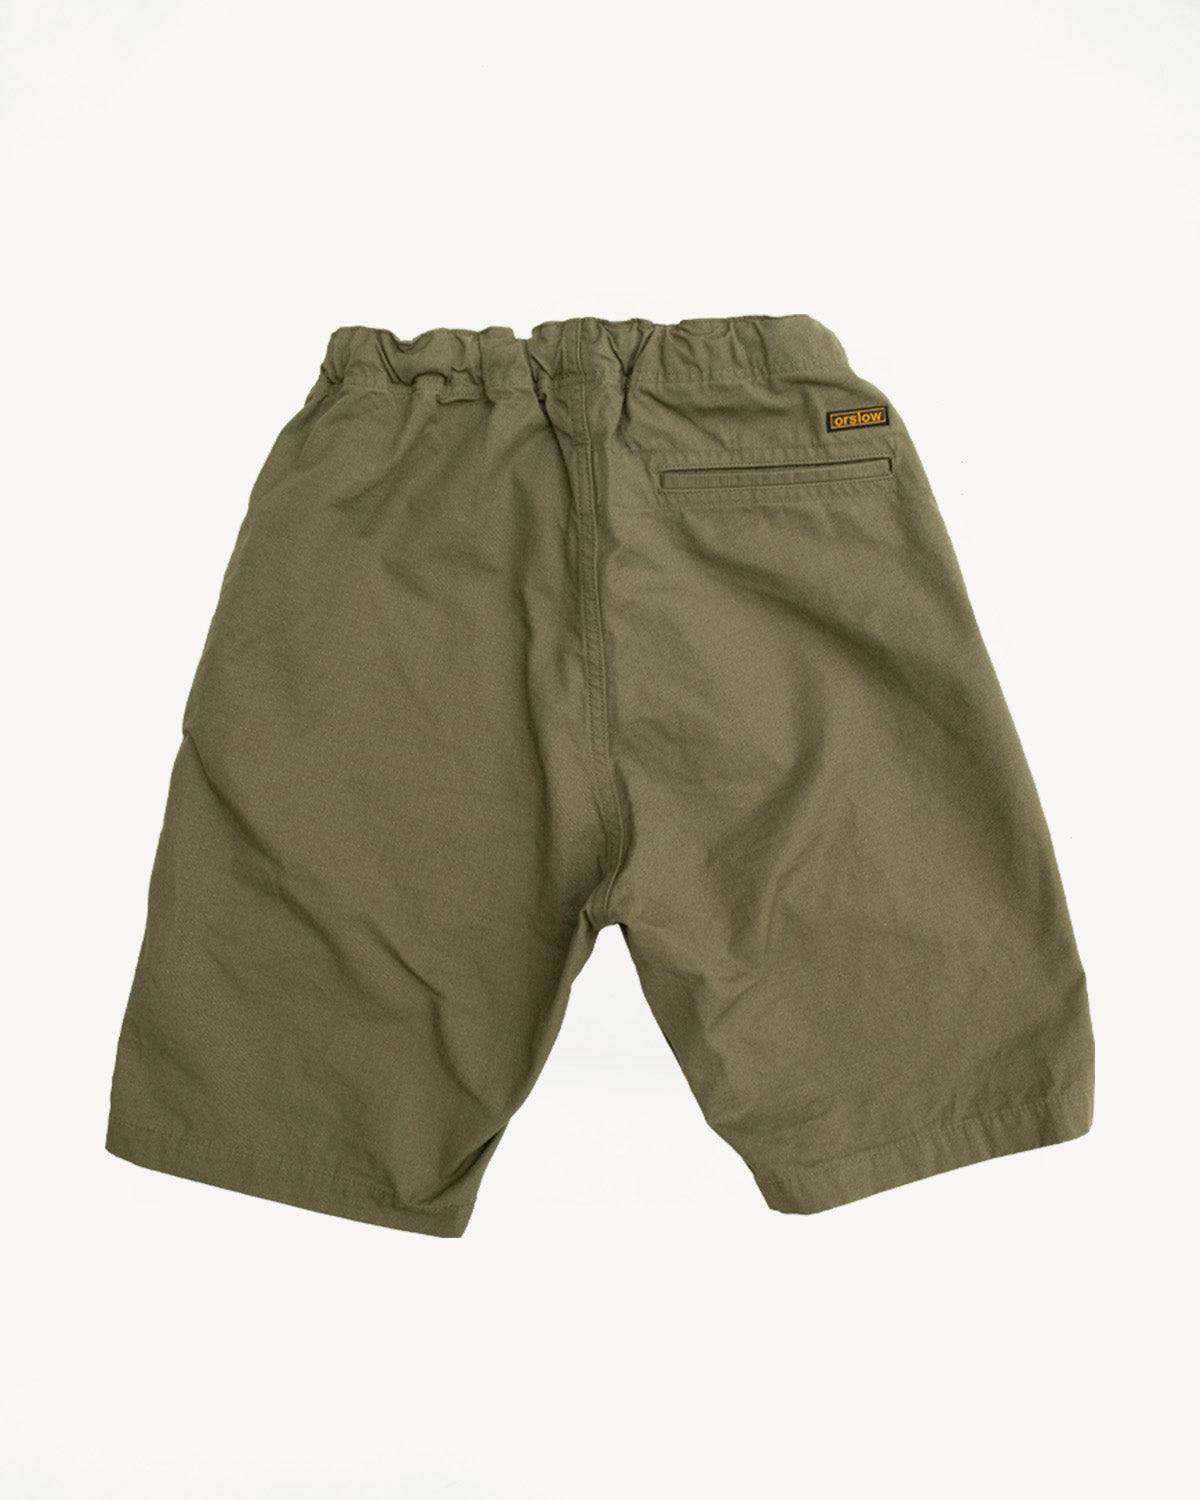 03-7022-76 - New Yorker Shorts - Army Ripstop